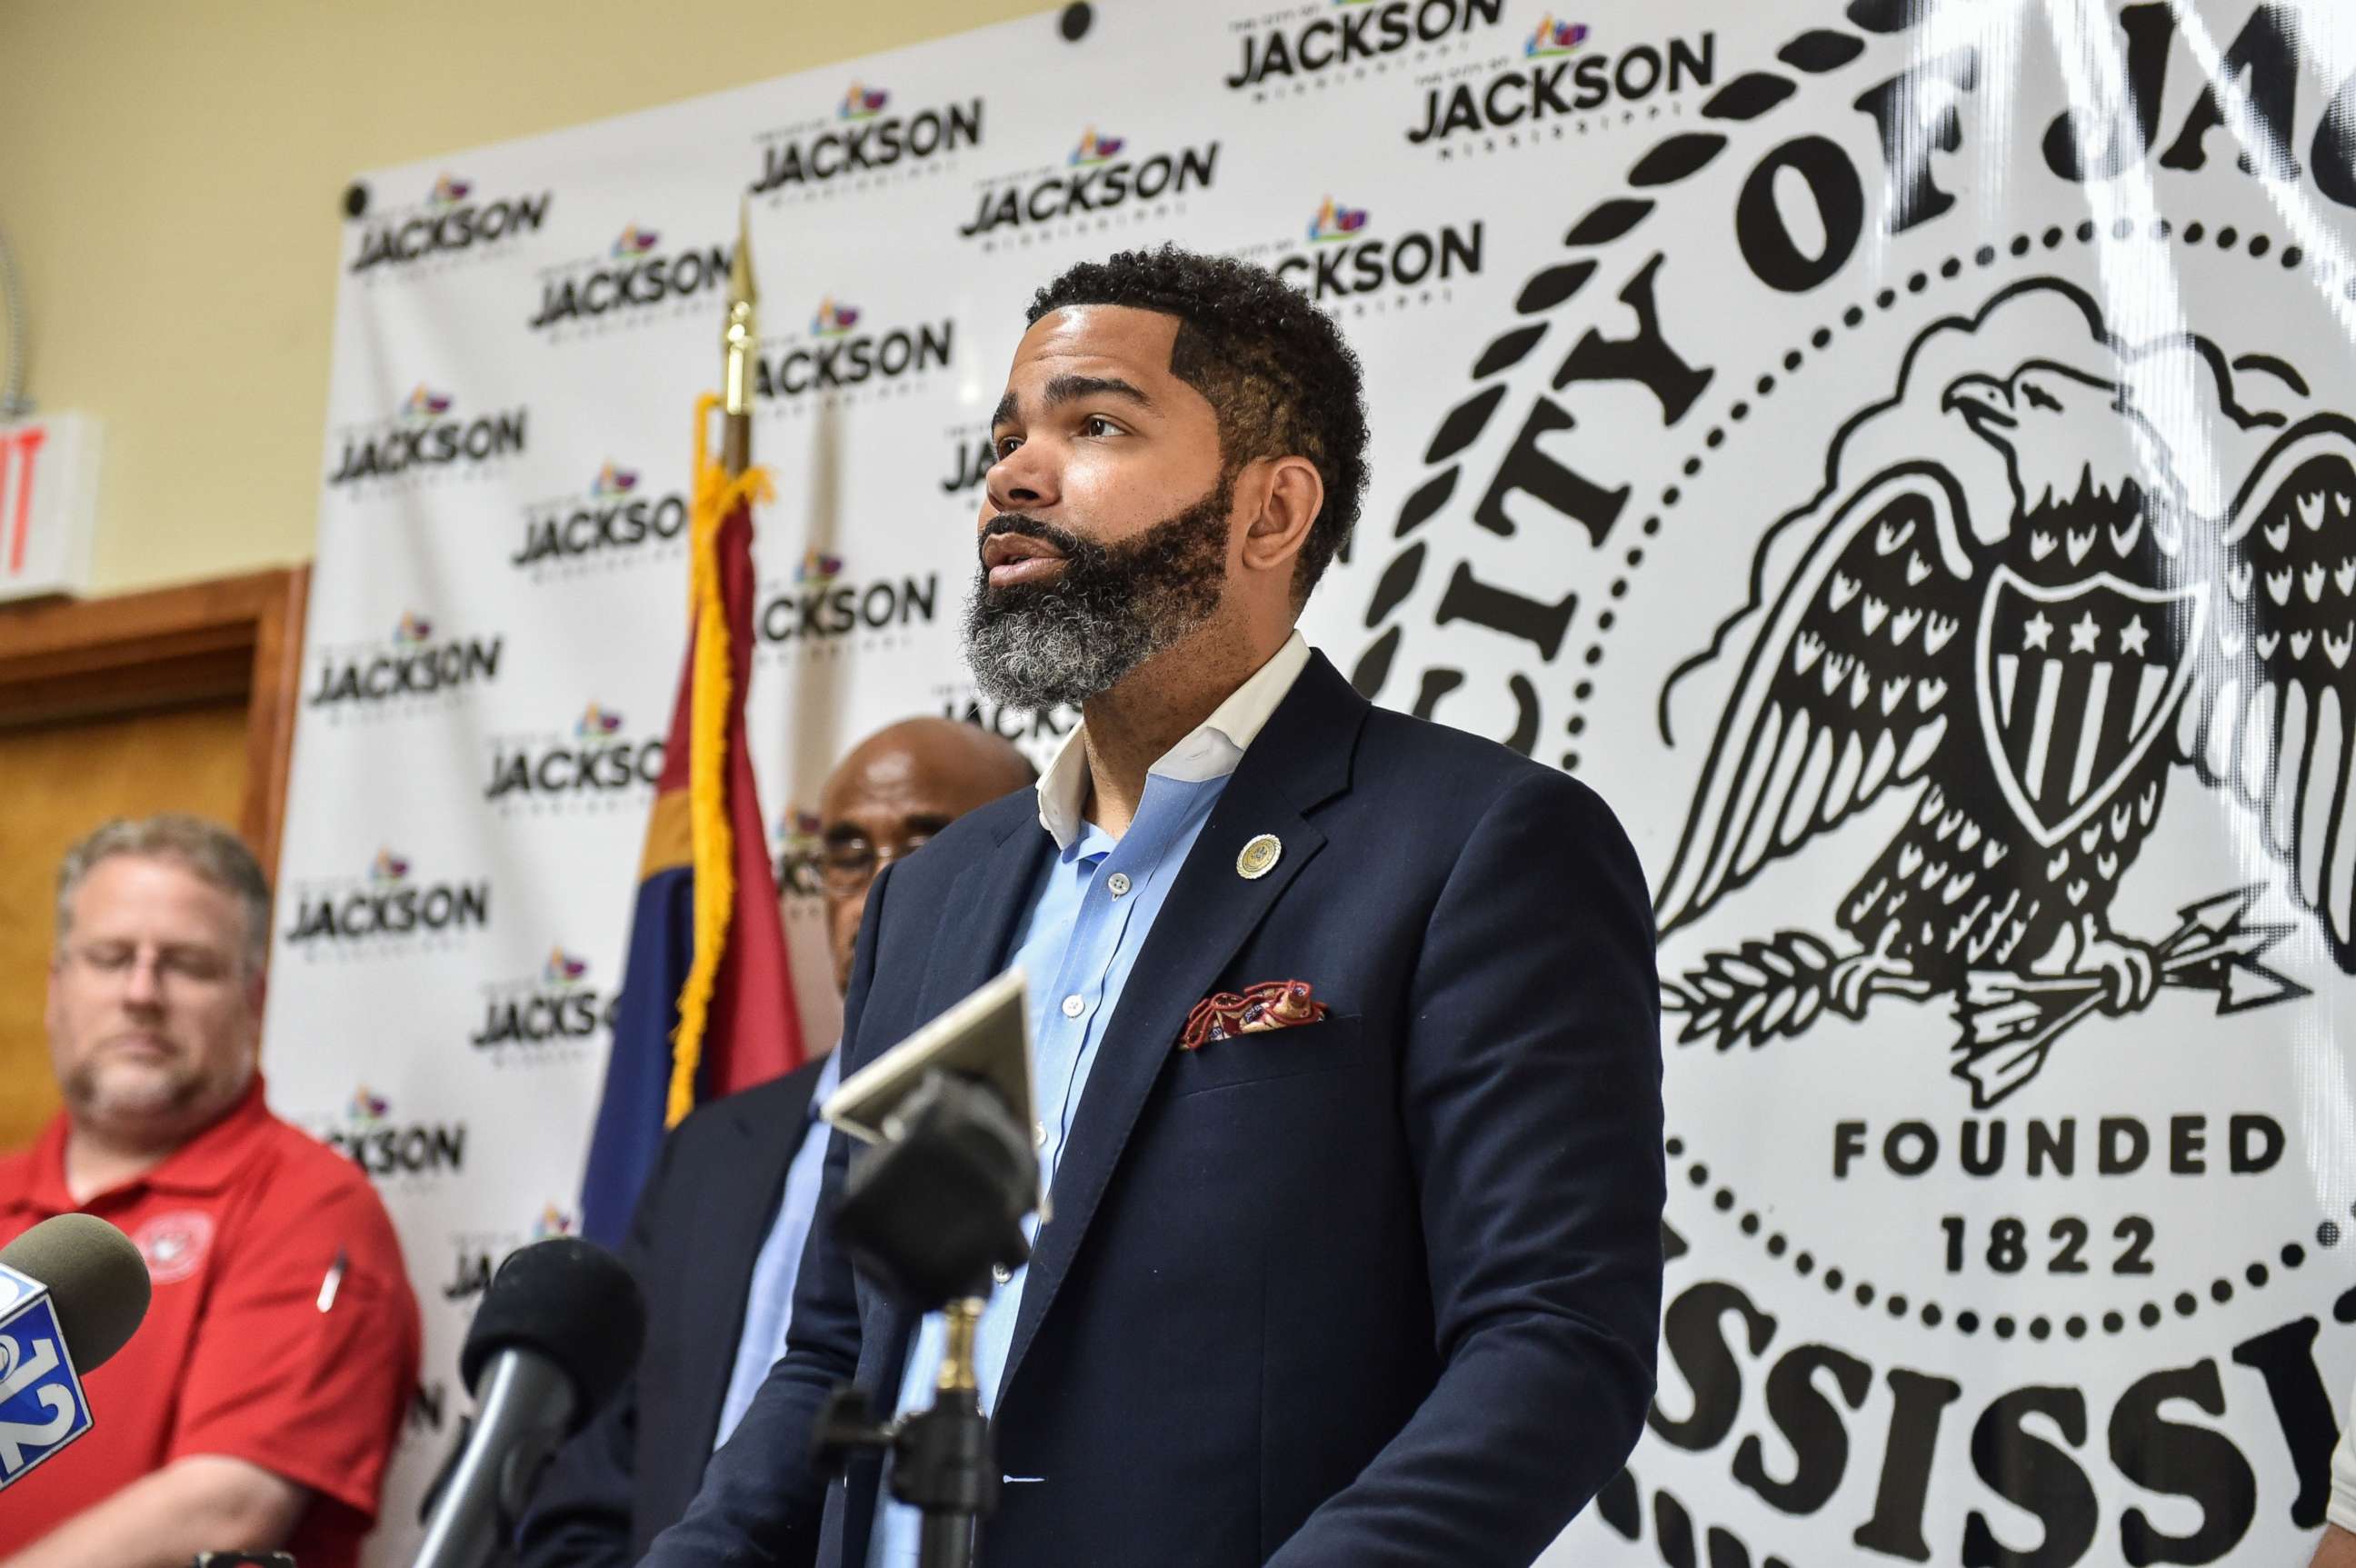 PHOTO: Mayor Chokwe Antar Lumumba speaks at a press conference regarding the city's recent flooding and water infrastructure issues in Jackson, Miss, Aug. 29, 2022.